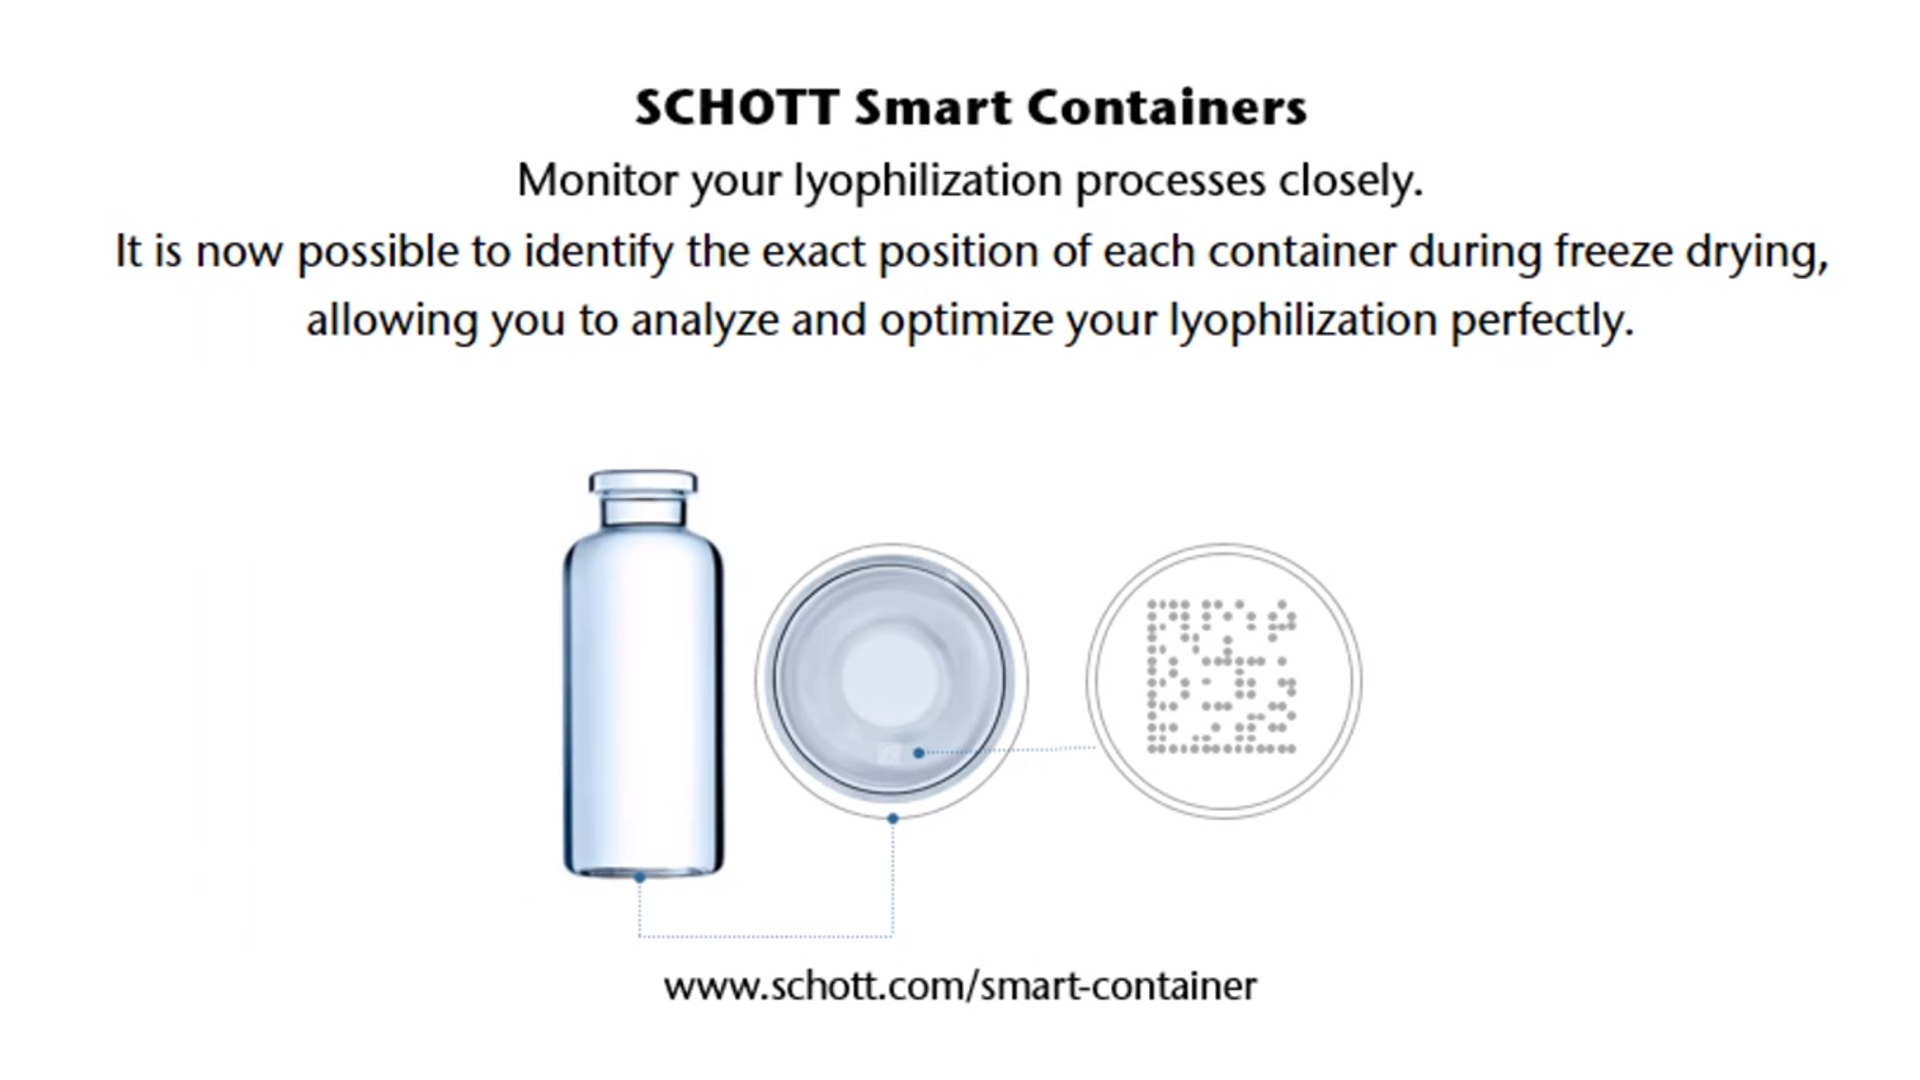 Video showing how SCHOTT Smart Containers monitor the lyophilization process